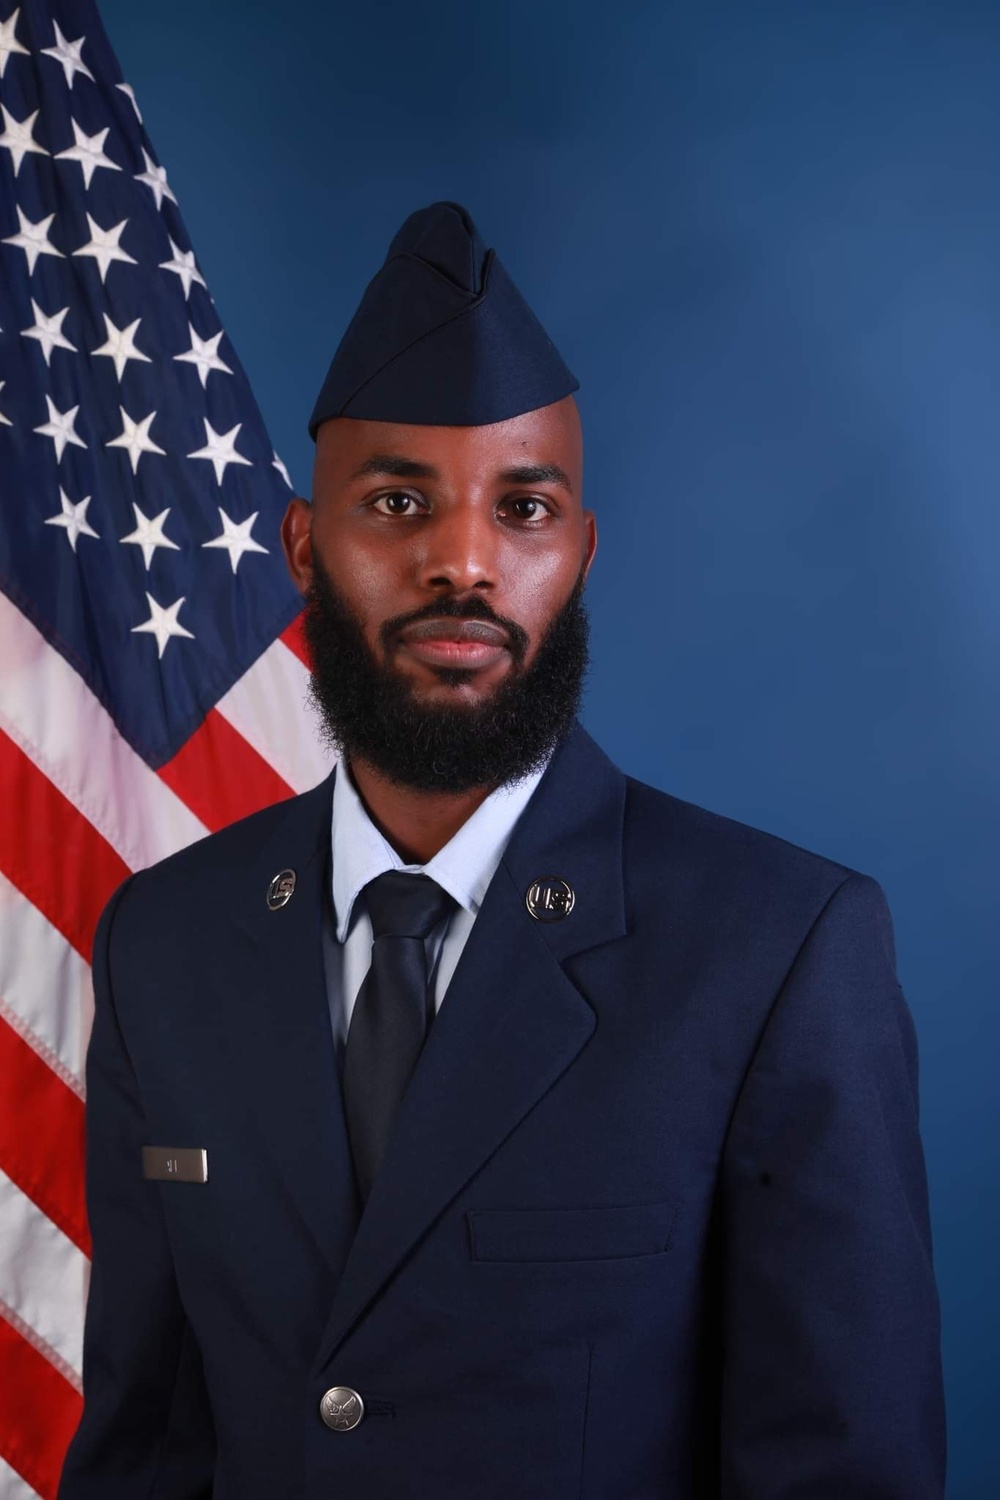 Airman survives refugee camp, sets goal as immigration lawyer